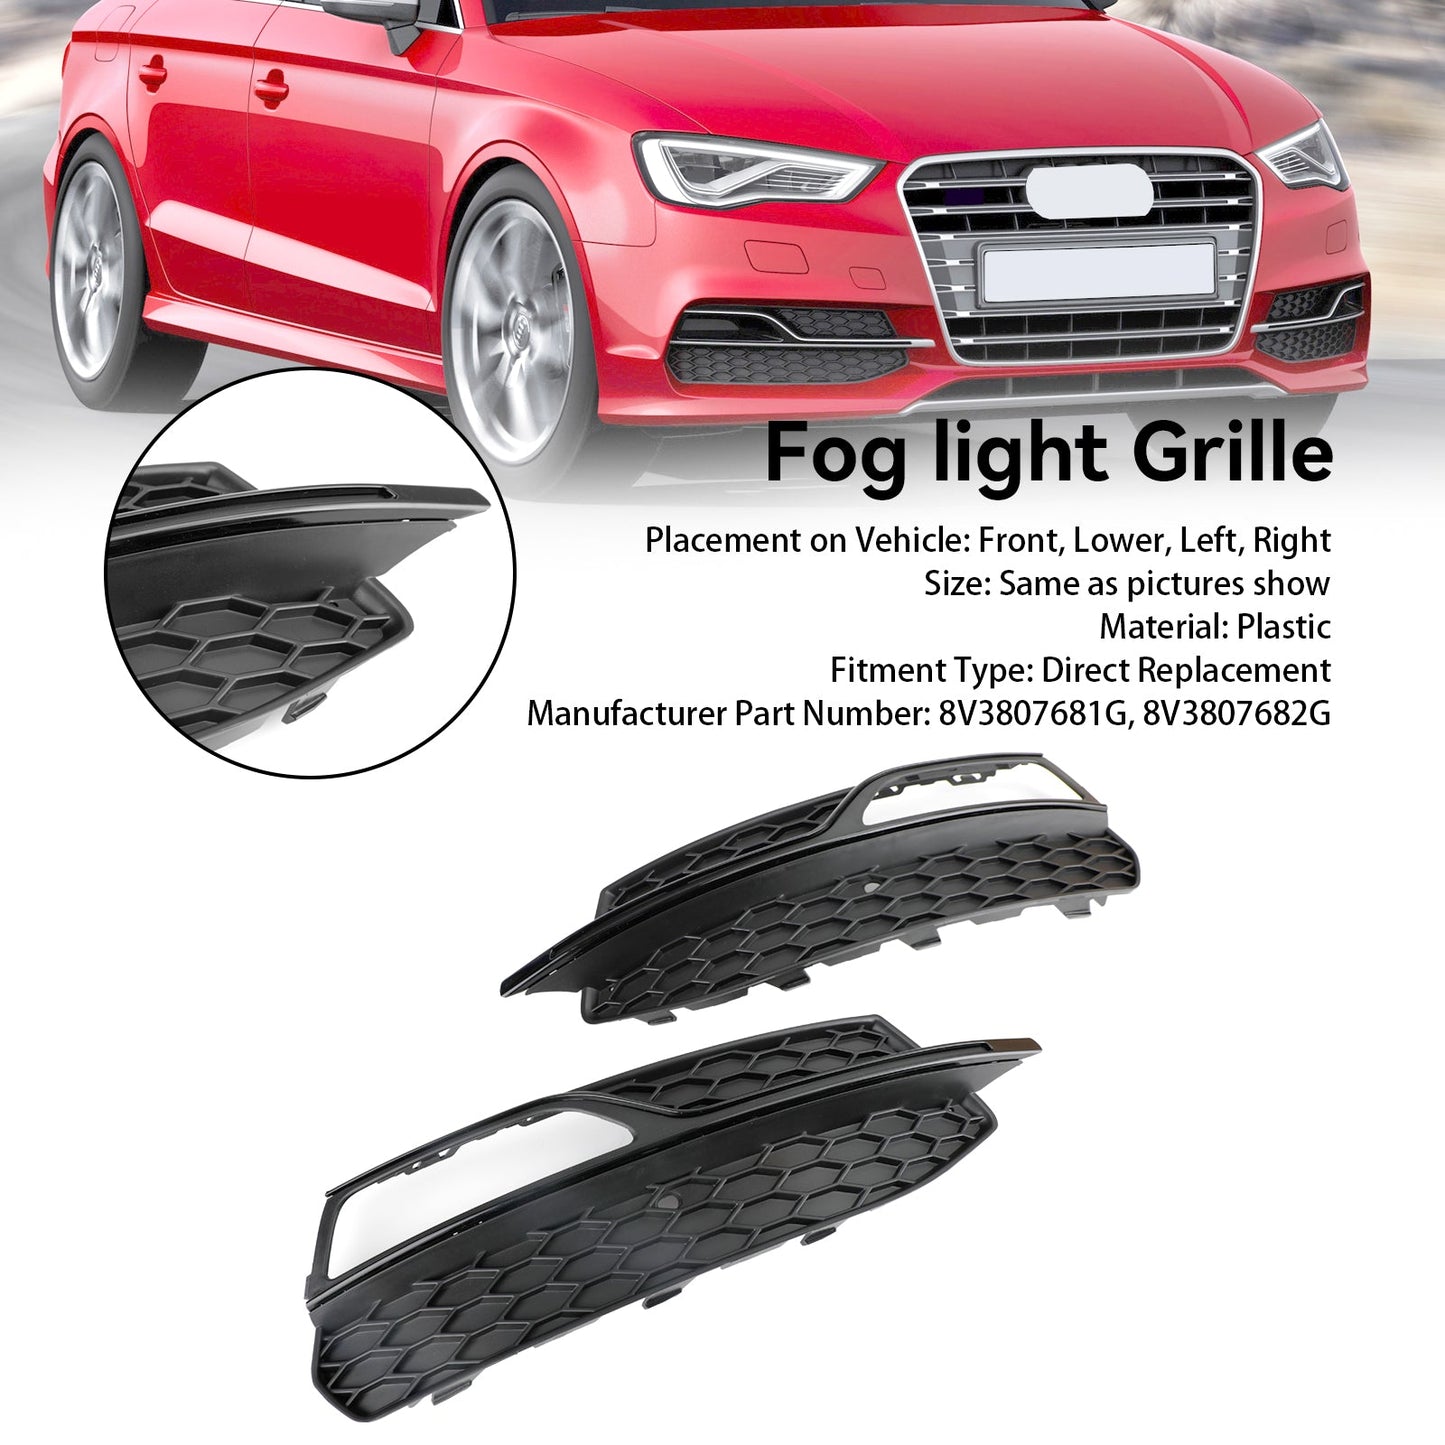 2013-2016 Audi A3 S-Line Lower Bumper Fog Light Cover Grill Grille